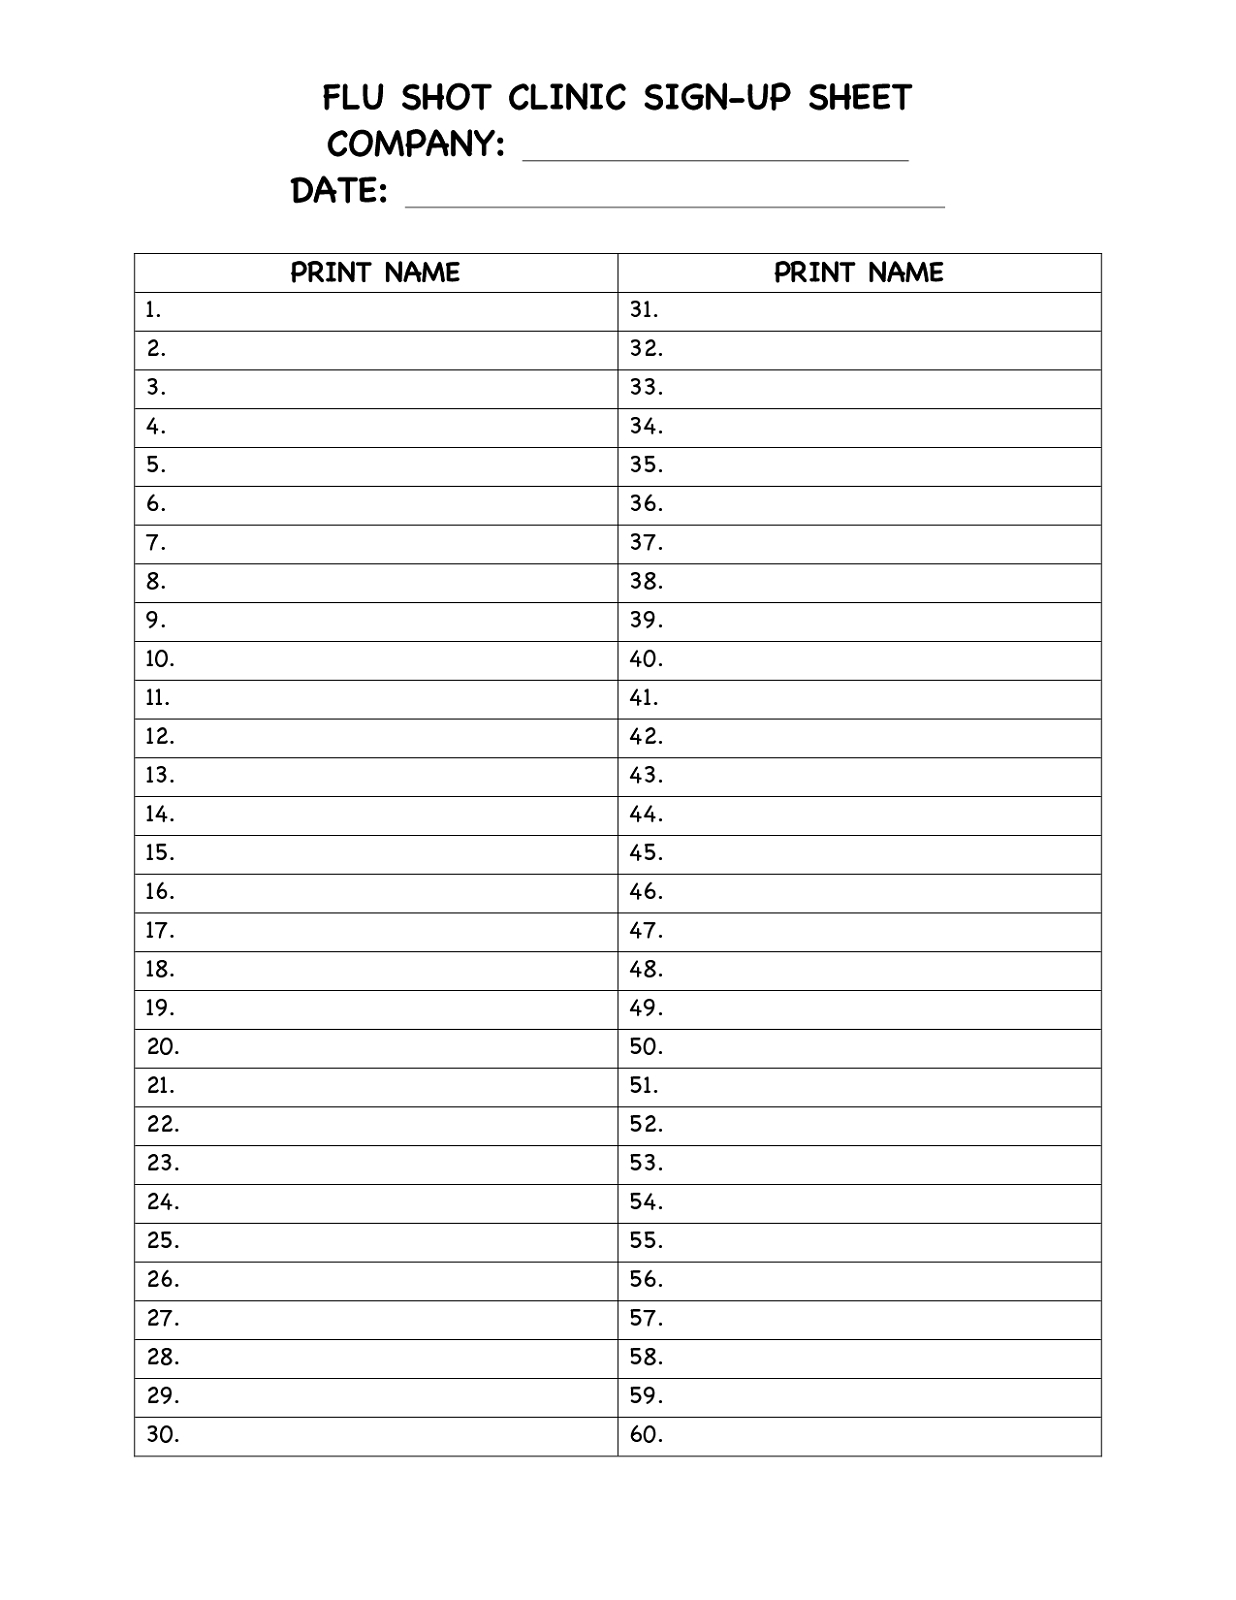 Potluck Sign Up Sheet Word For Events | Loving Printable Within Free Sign Up Sheet Template Word